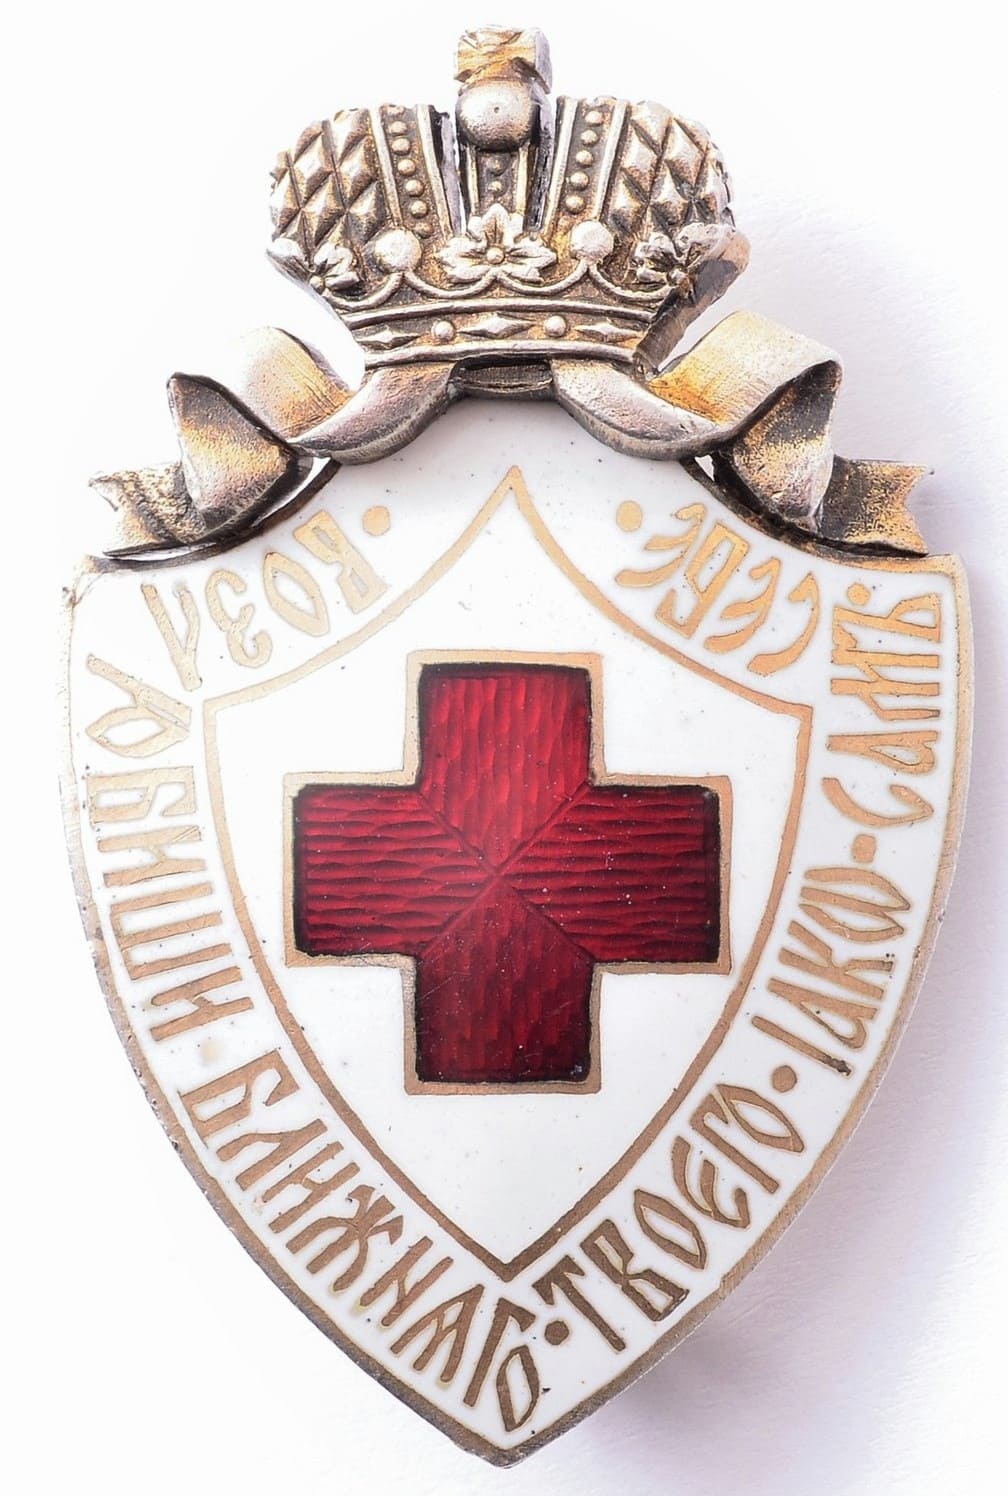 Imperial Russian Red Cross Society Badge marked ИЛ.jpg